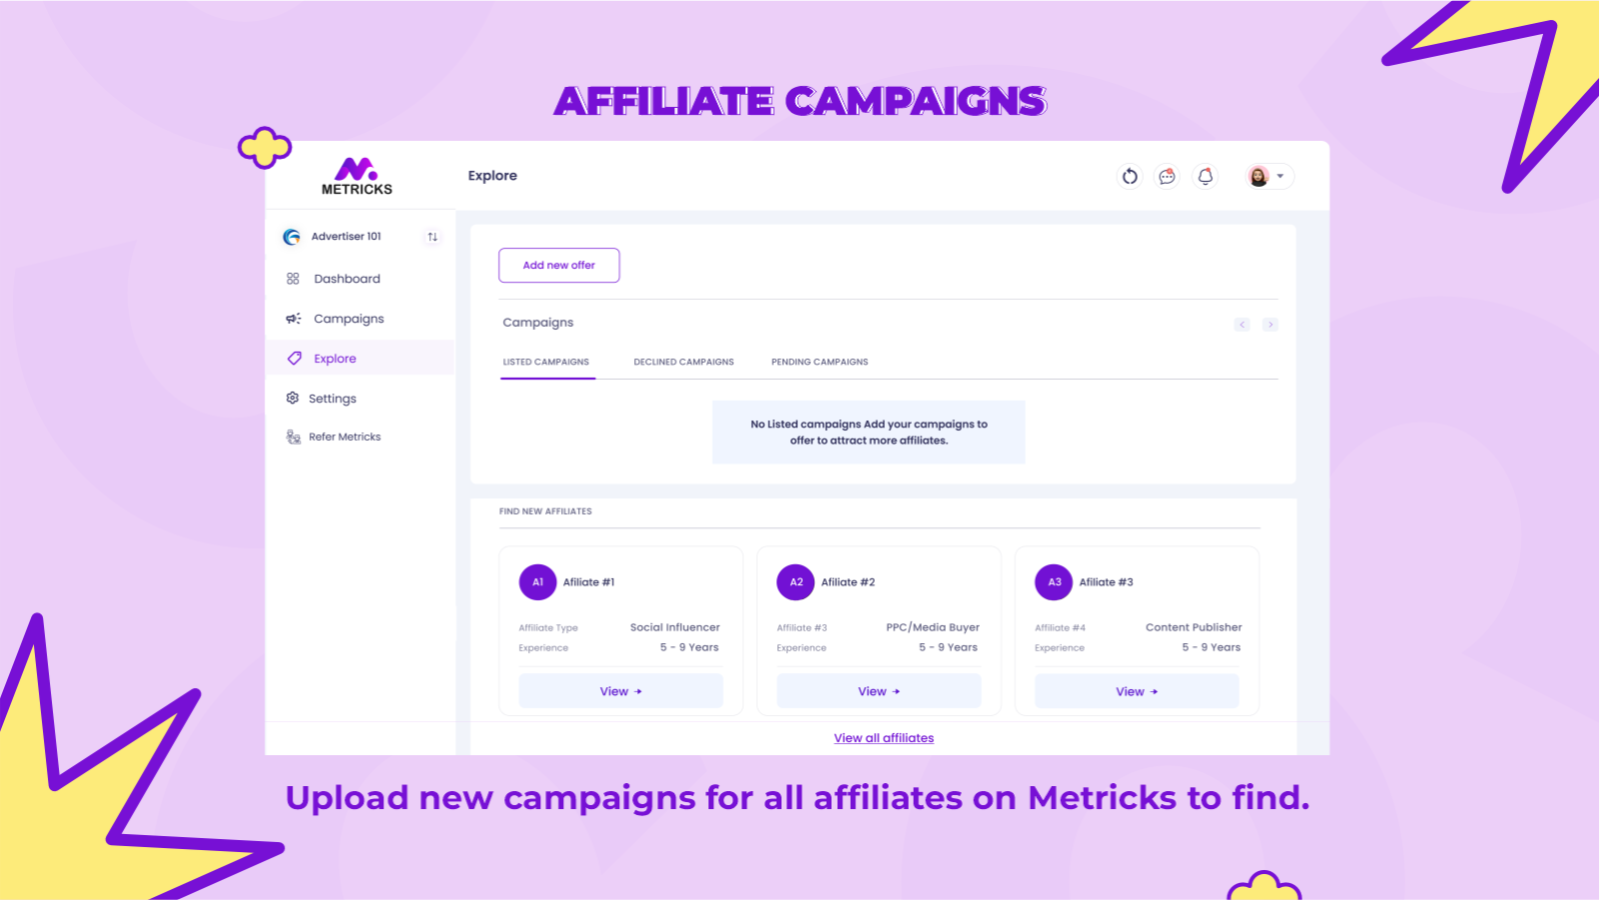 Make your campaigns public for affiliates on Metricks to find